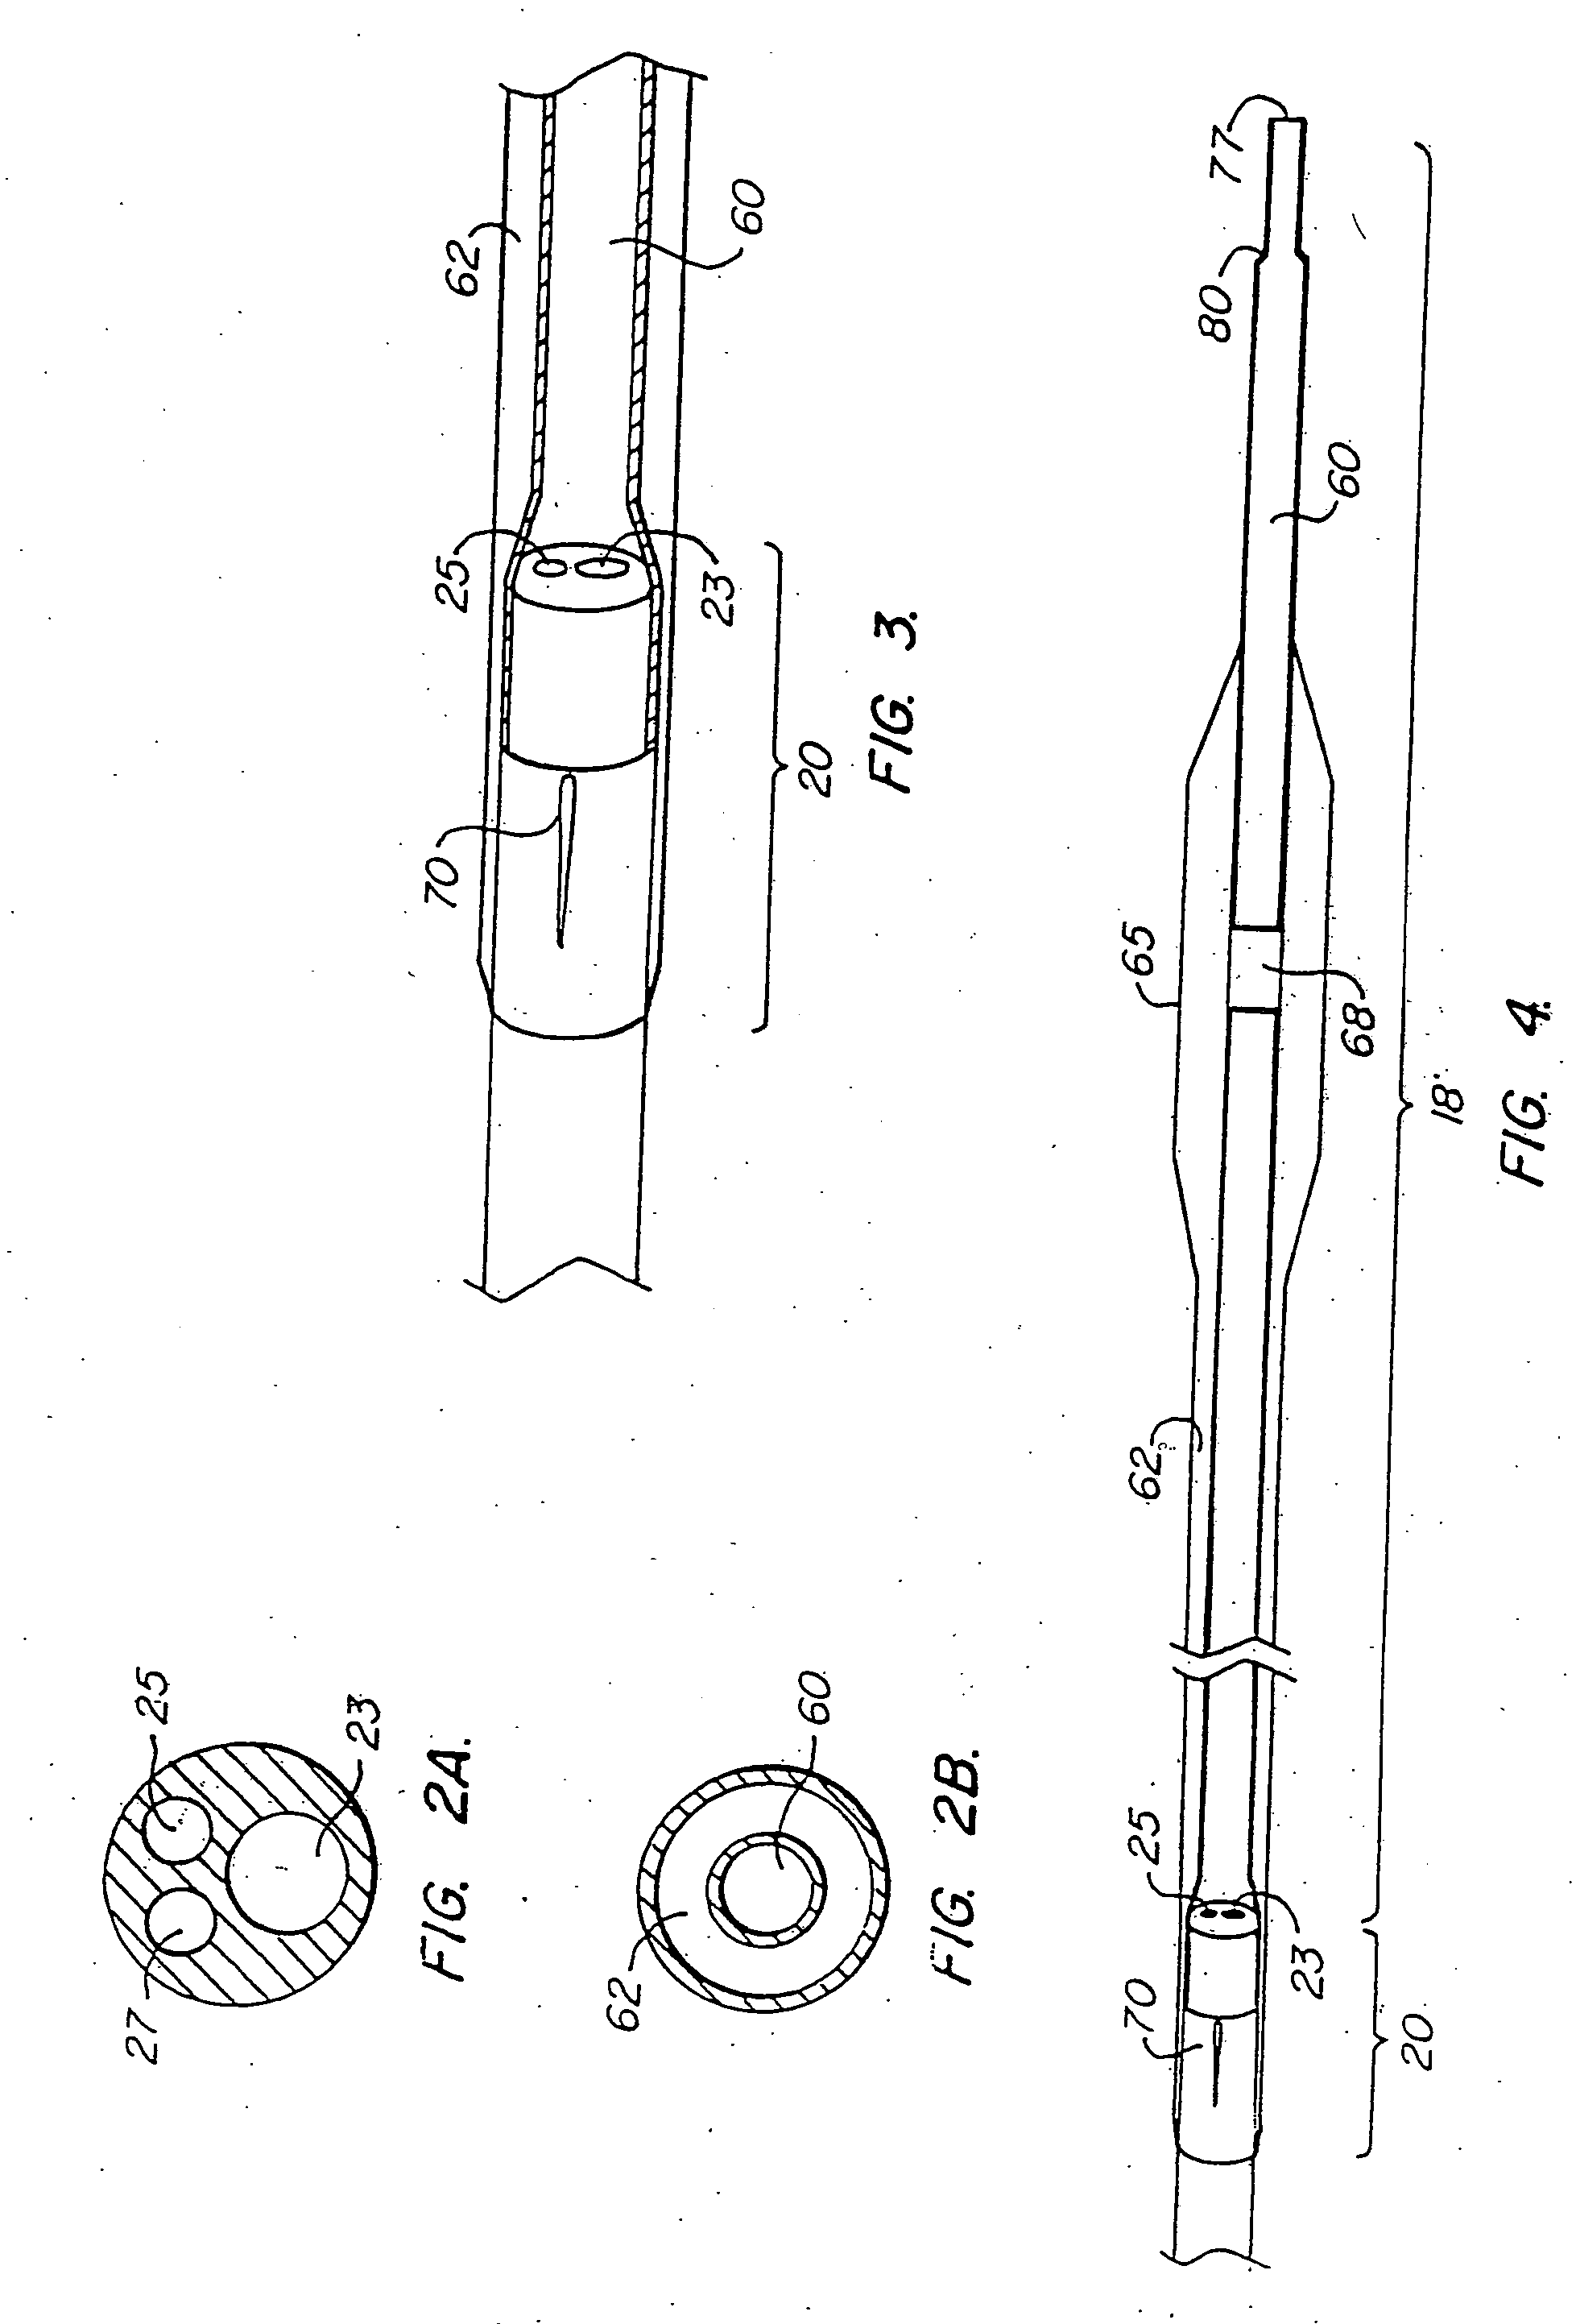 Catheter system having a balloon angioplasty device disposed over a work element lumen